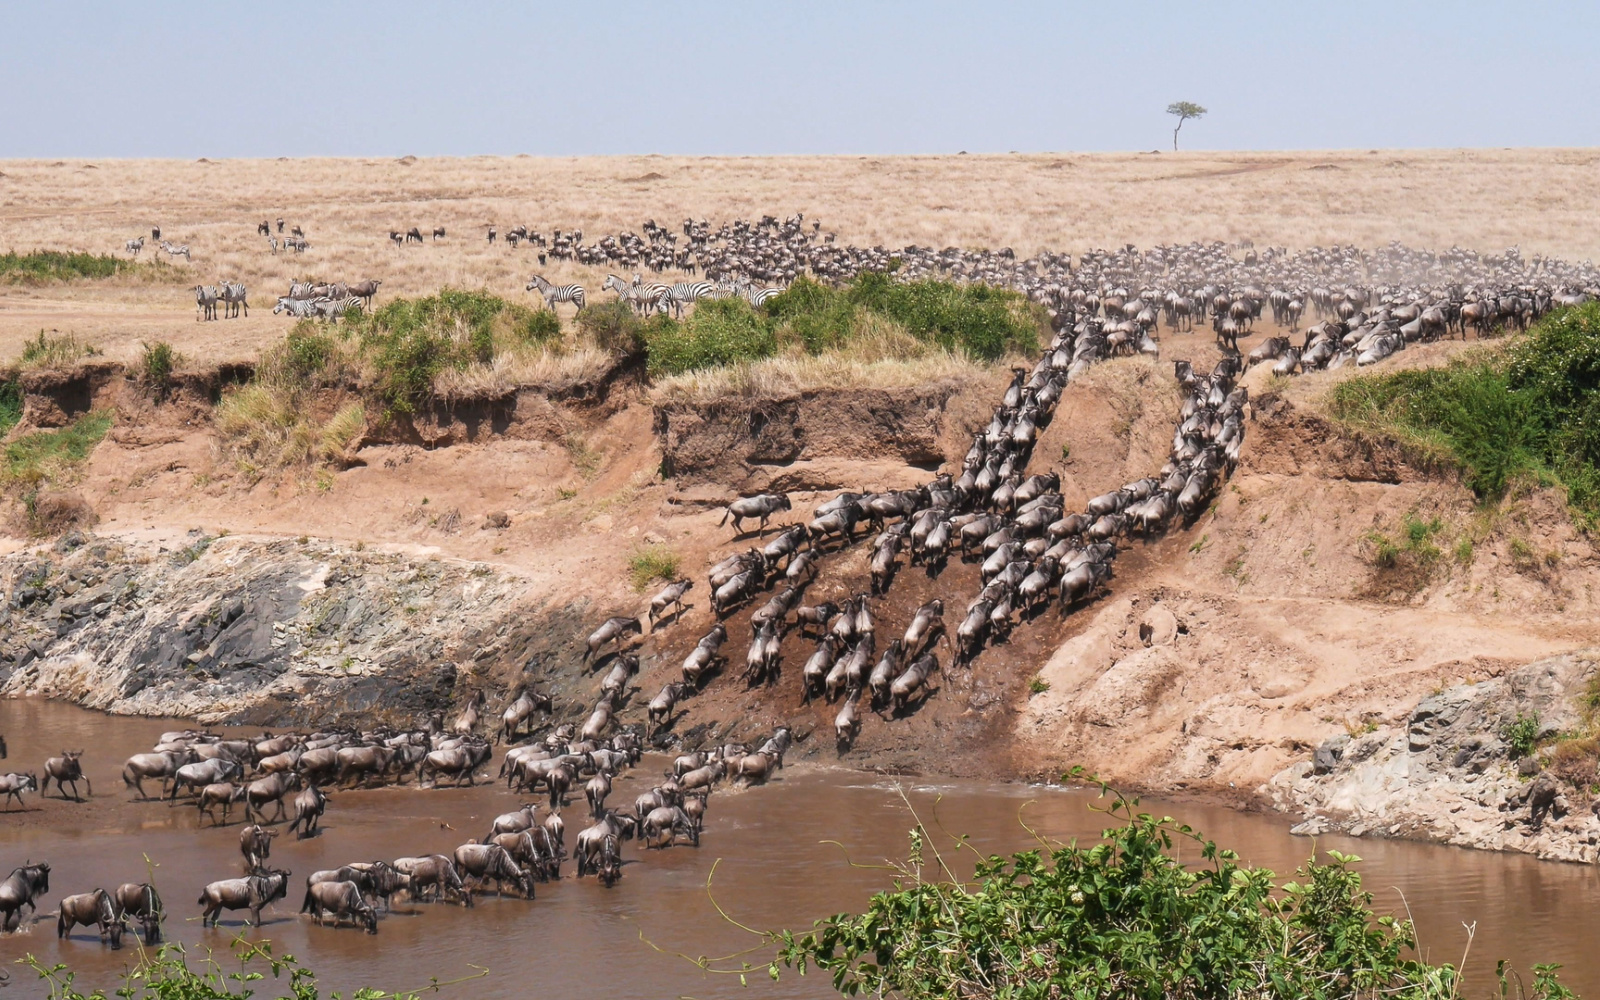 What Is the Great Wildebeest Migration?